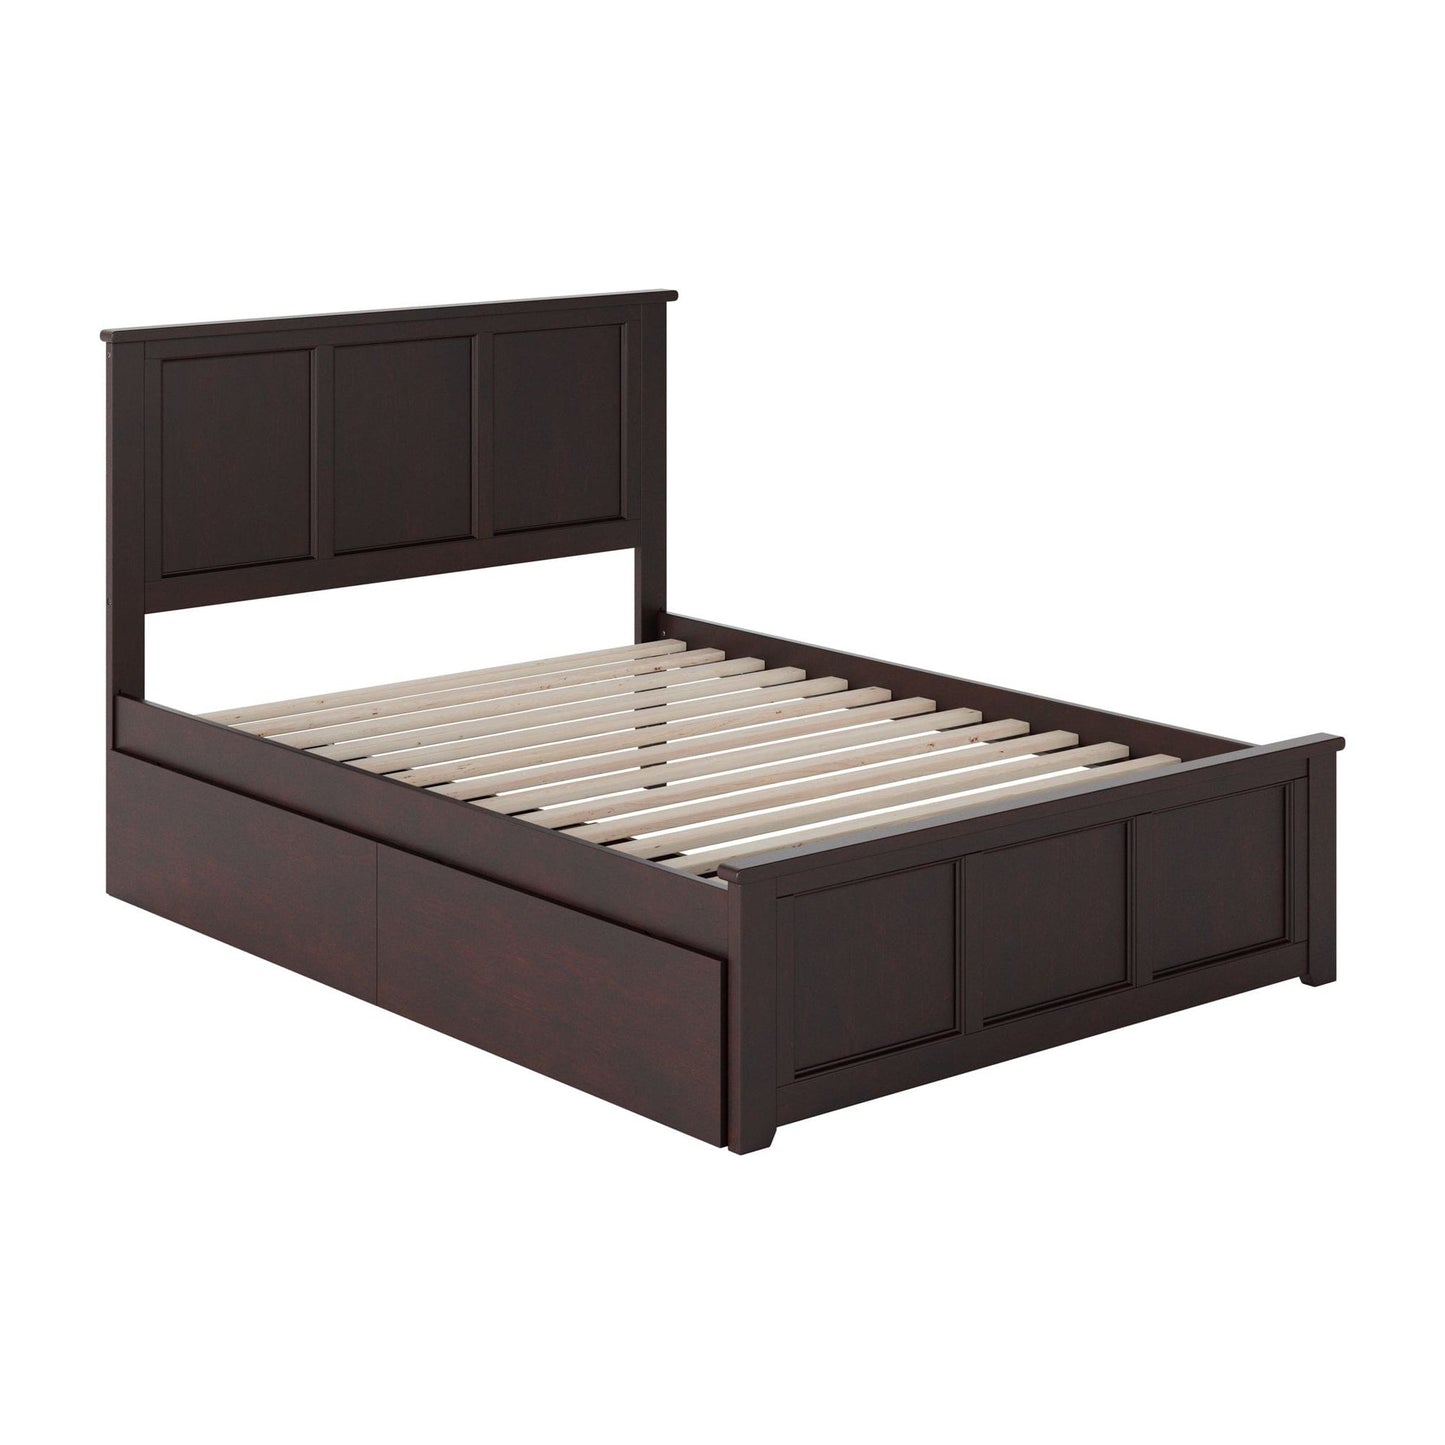 AFI Furnishings Madison Full Platform Bed with Matching Foot Board with 2 Urban Bed Drawers